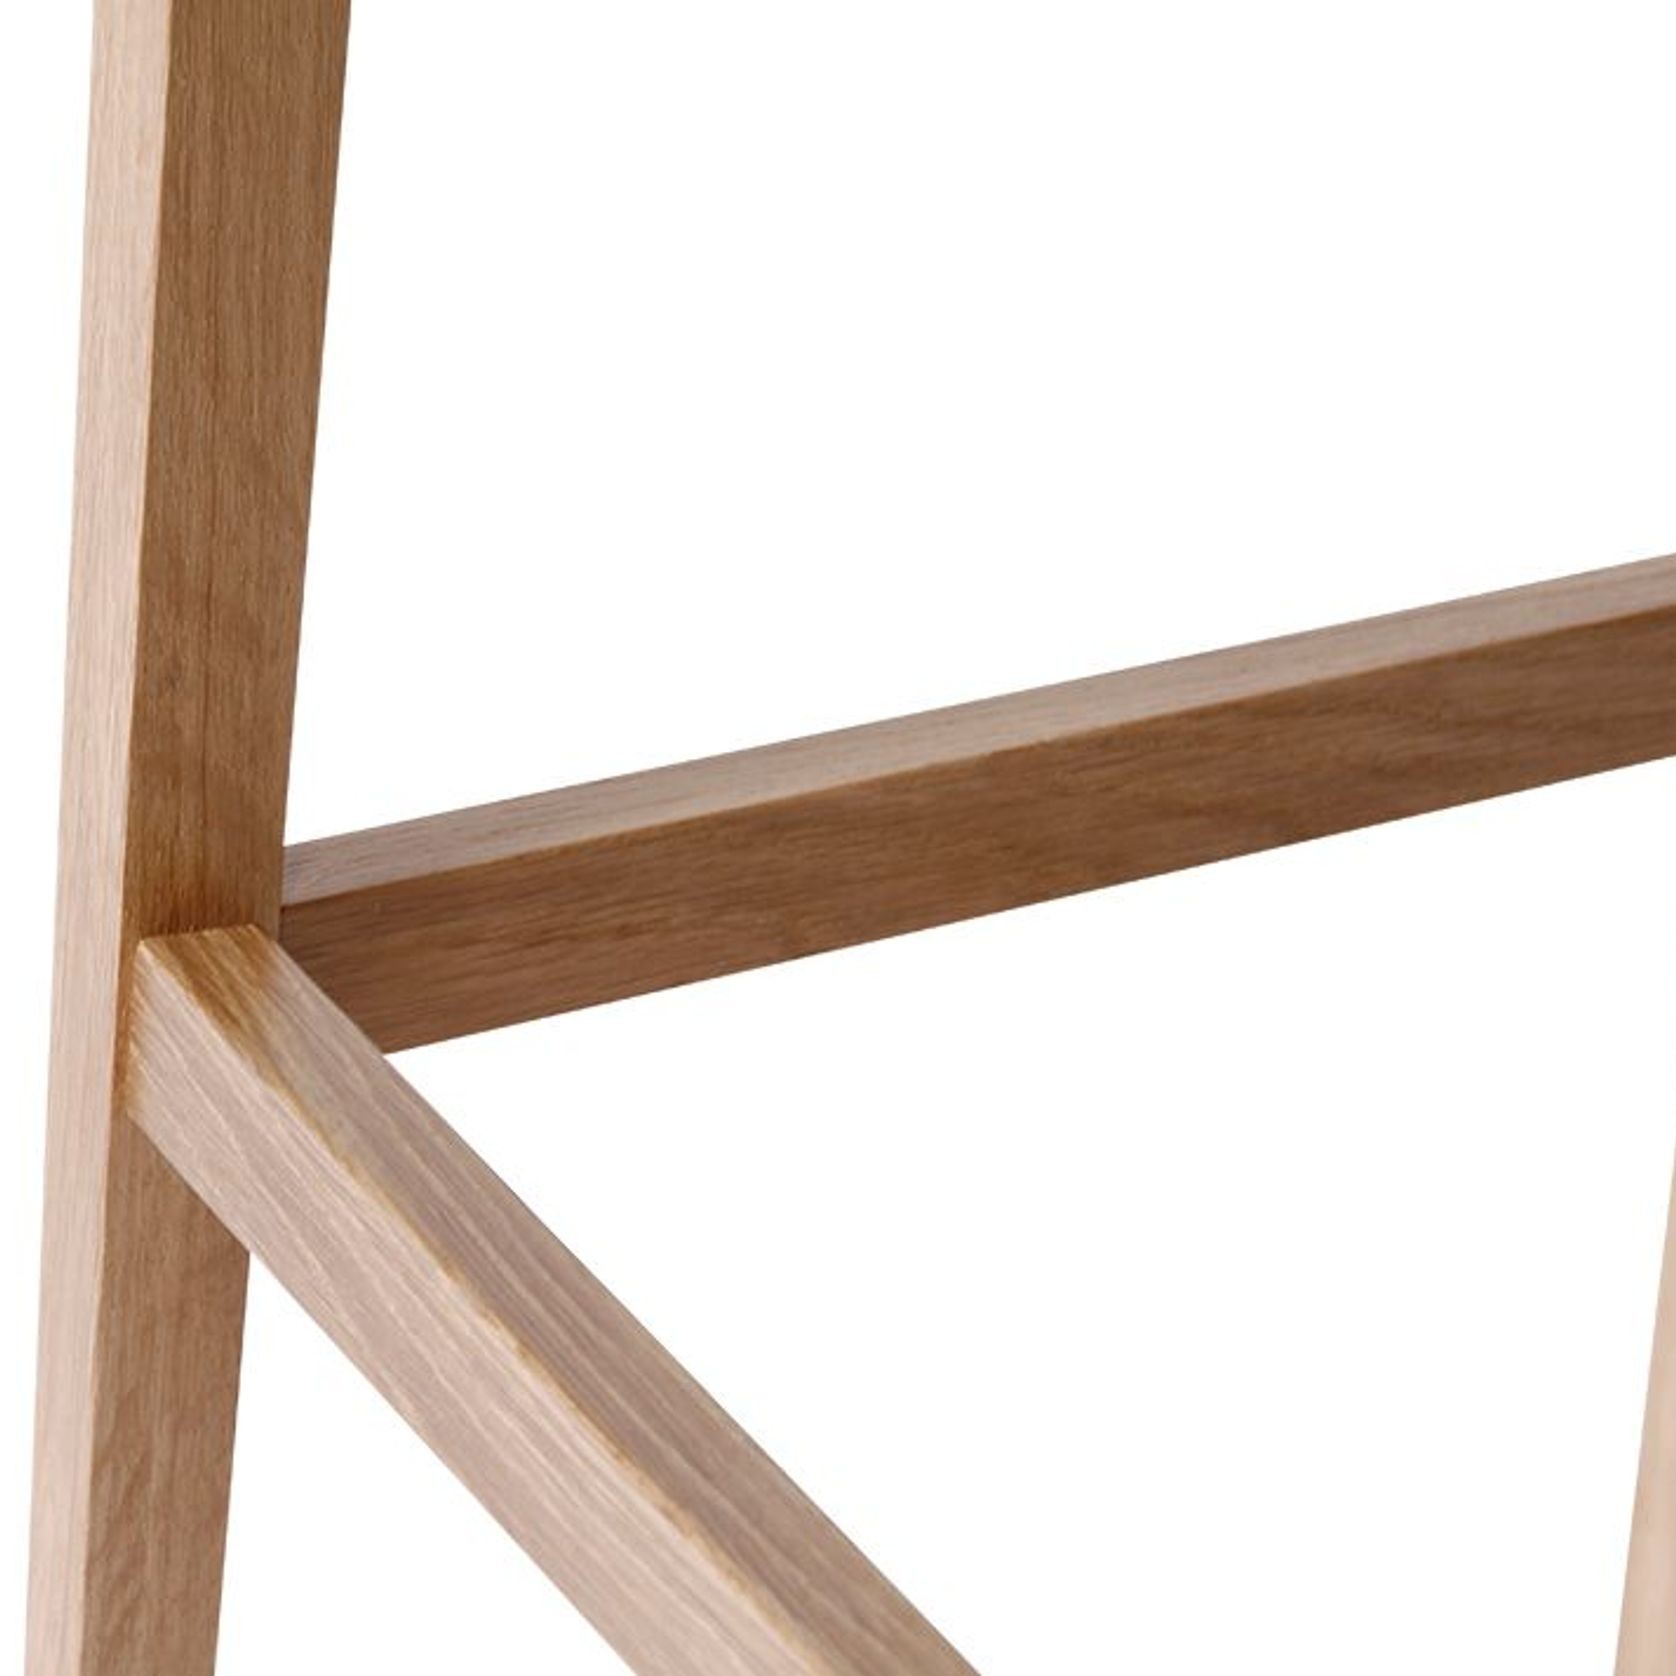 Stockholm Kitchen Stool - Natural Oak - by TON gallery detail image